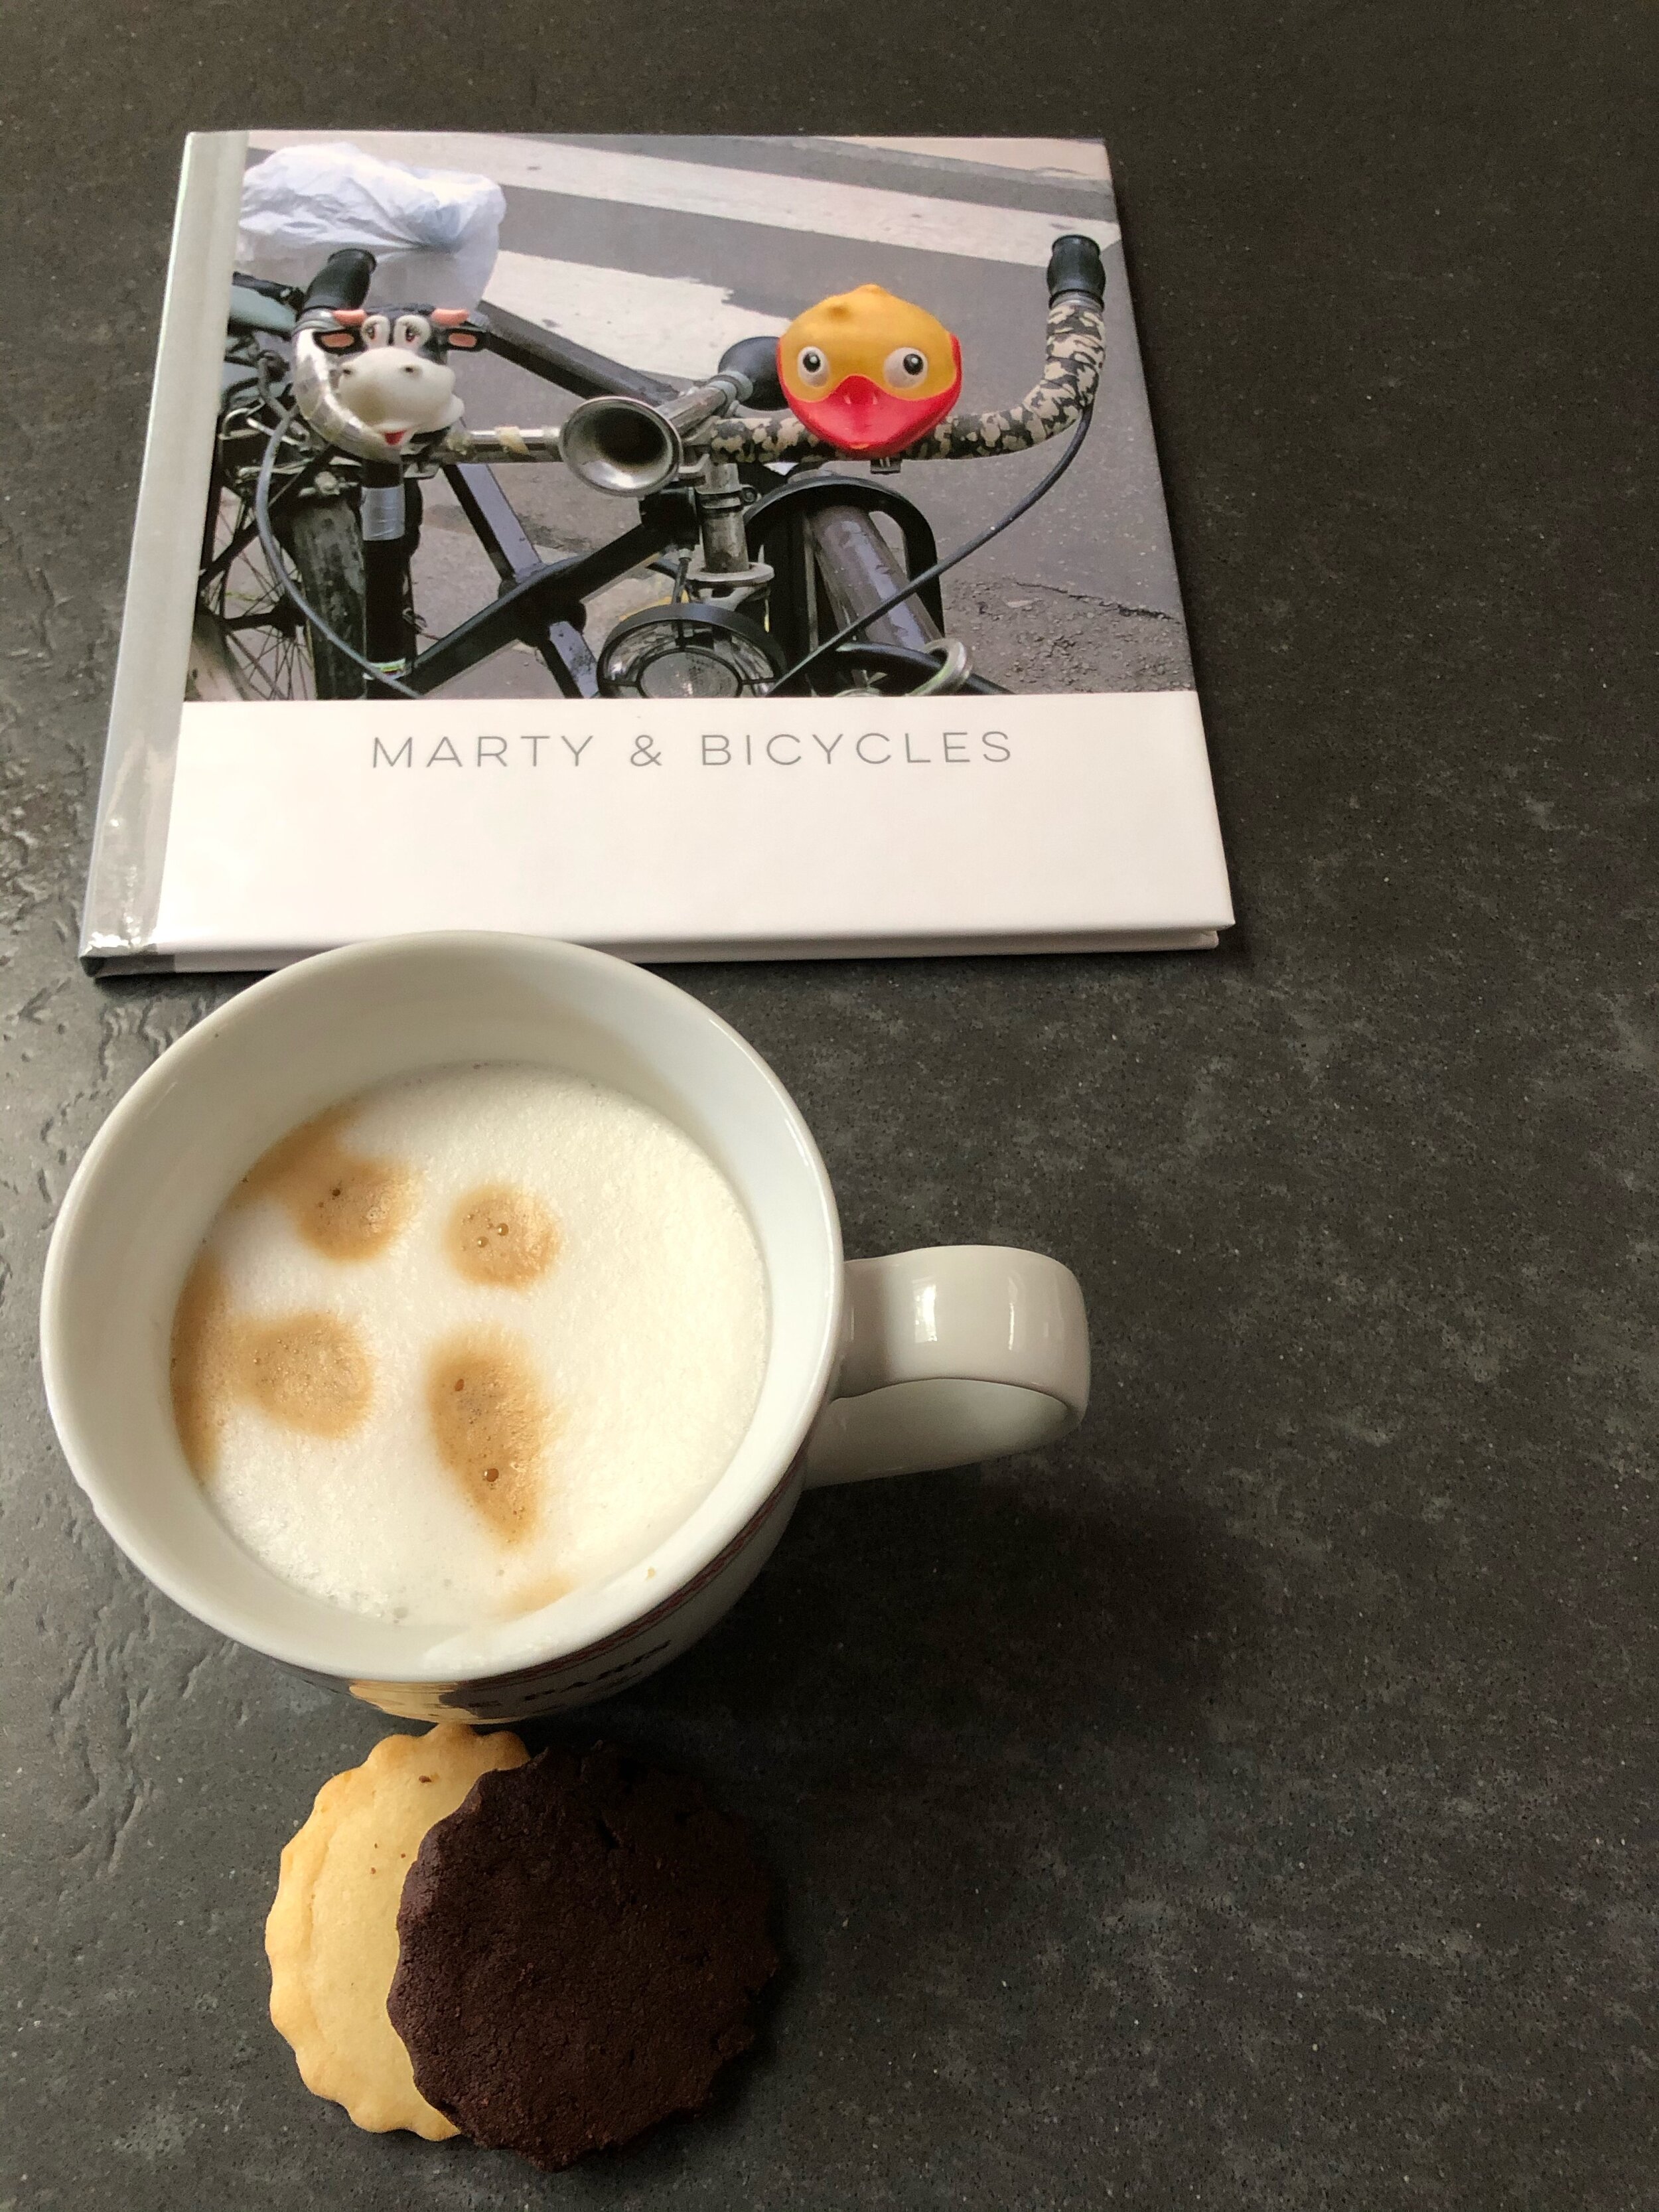 My next blog is on bicycles.  I made this short book just to check it out.